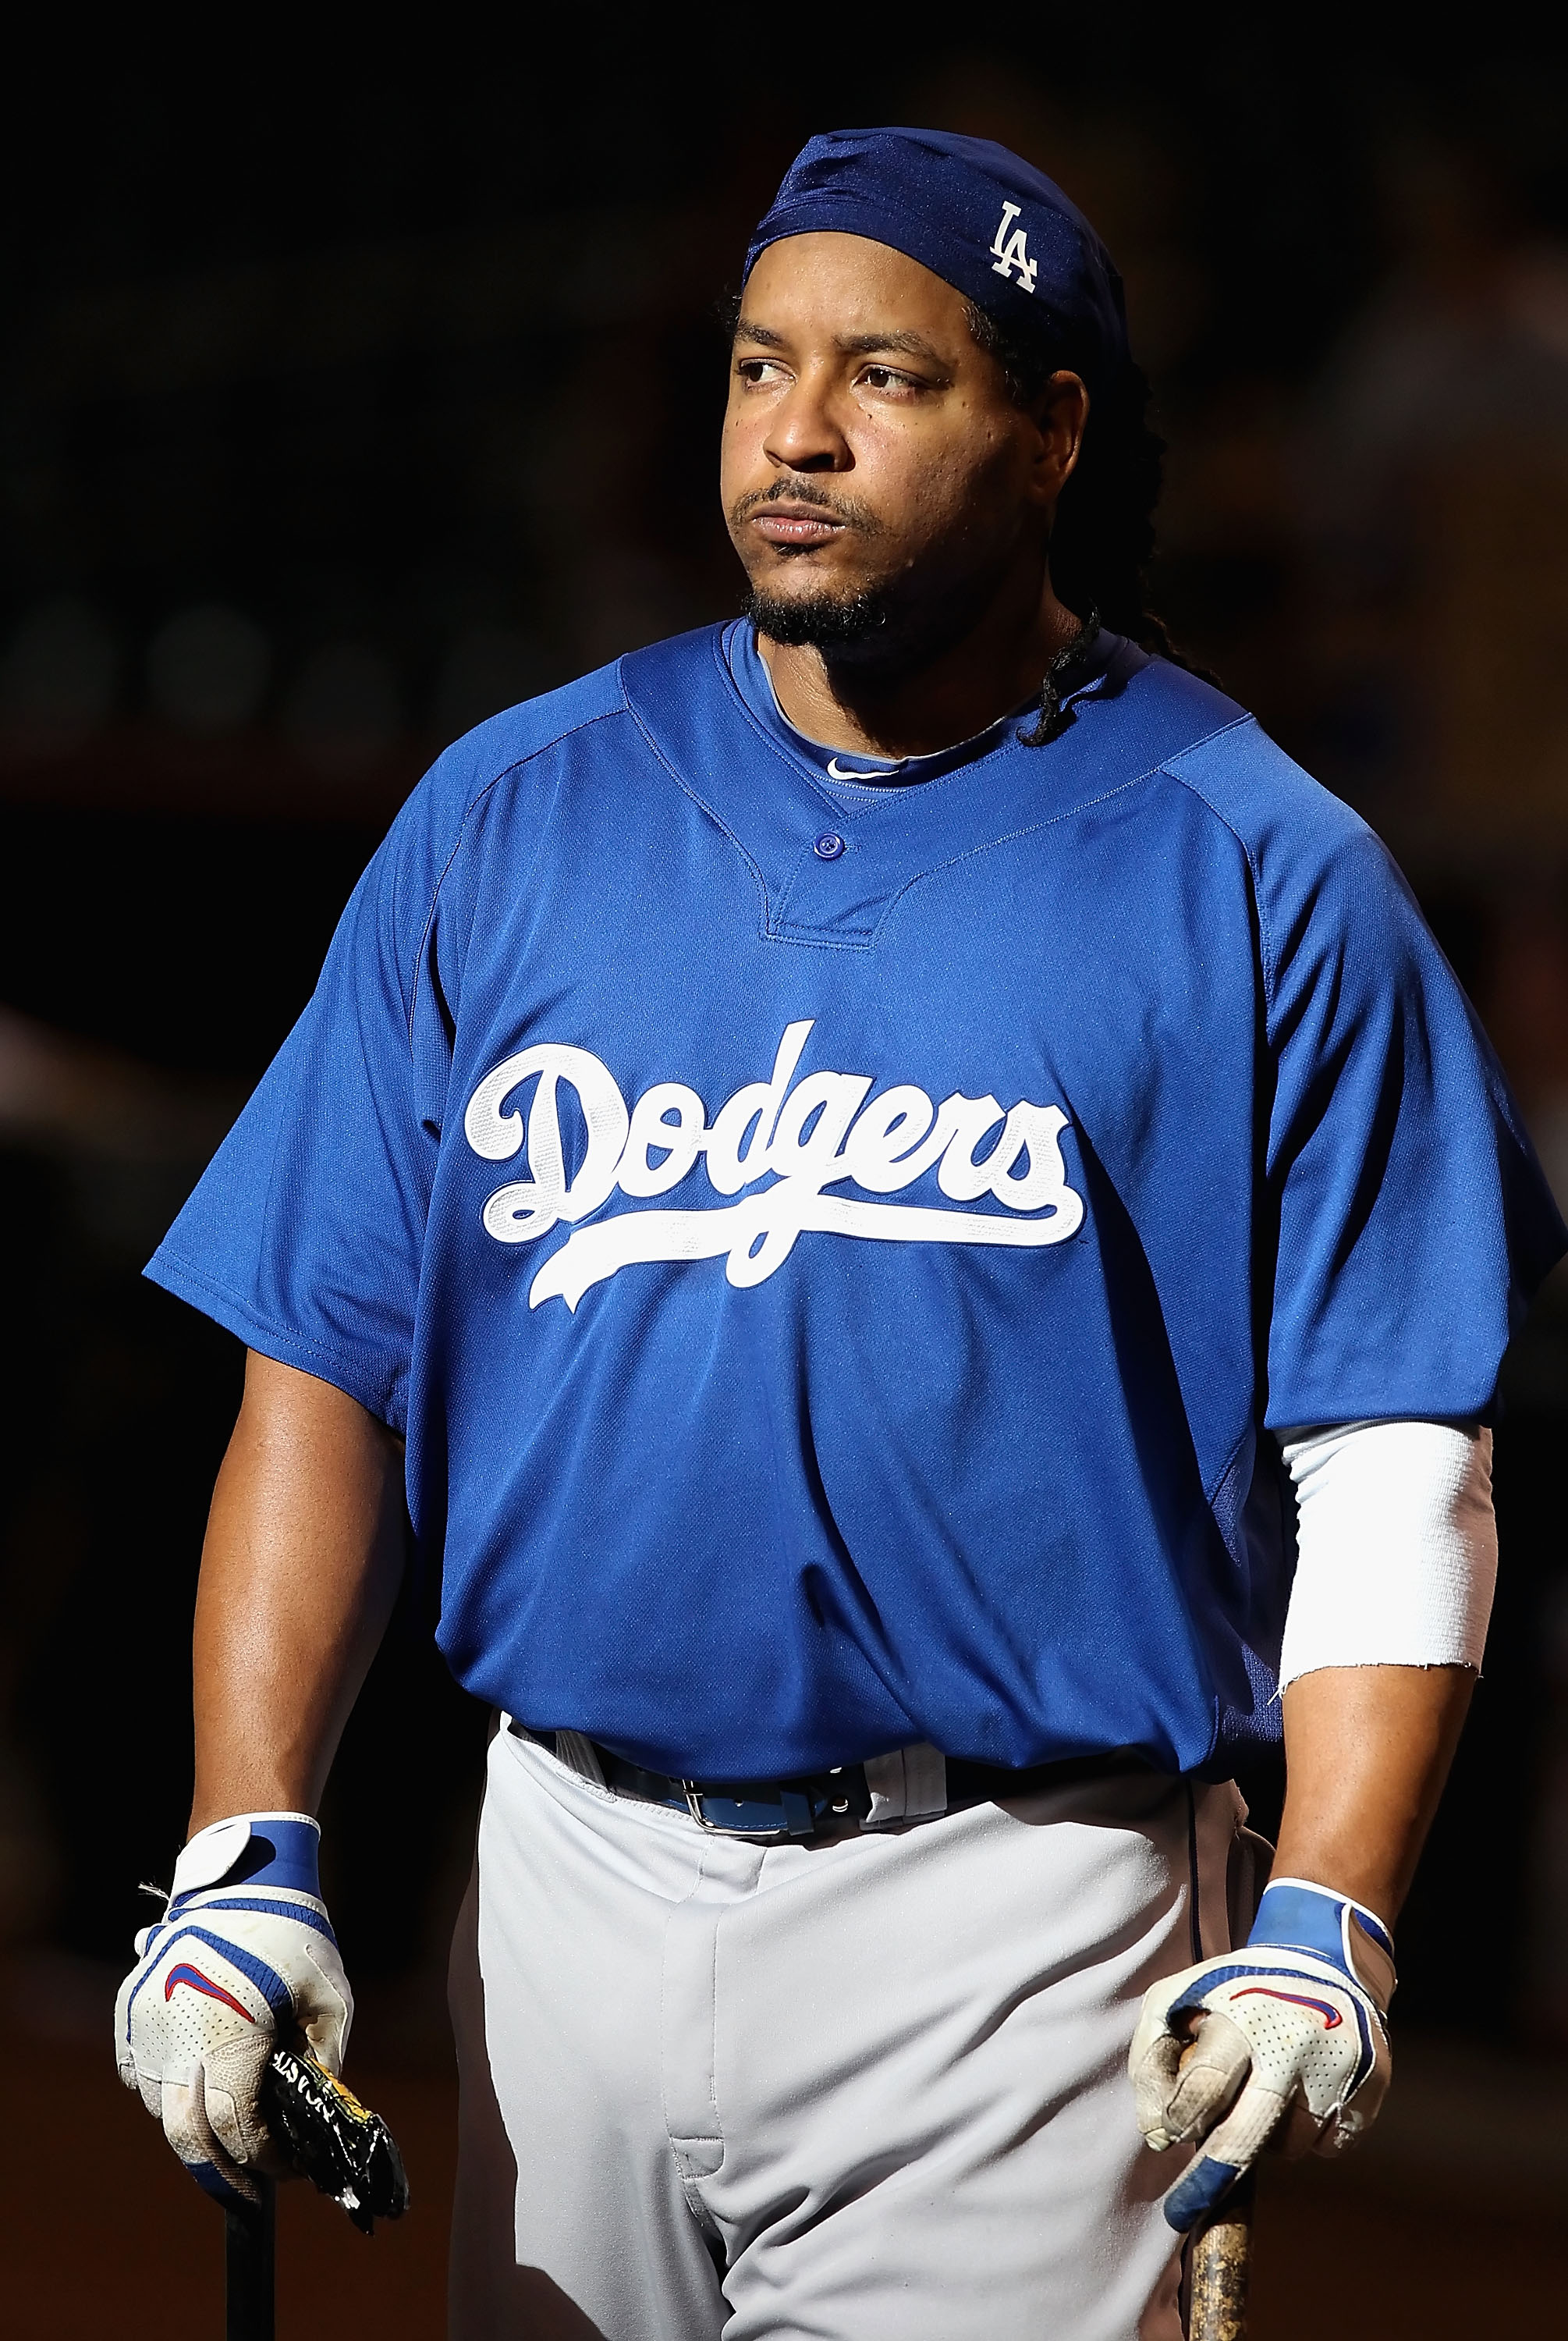 PHOENIX - JULY 03:  Manny Ramirez #99 of the Los Angeles Dodgers takes batting practice before the Major League Baseball game against the Arizona Diamondbacks at Chase Field on July 3, 2010 in Phoenix, Arizona.  (Photo by Christian Petersen/Getty Images)